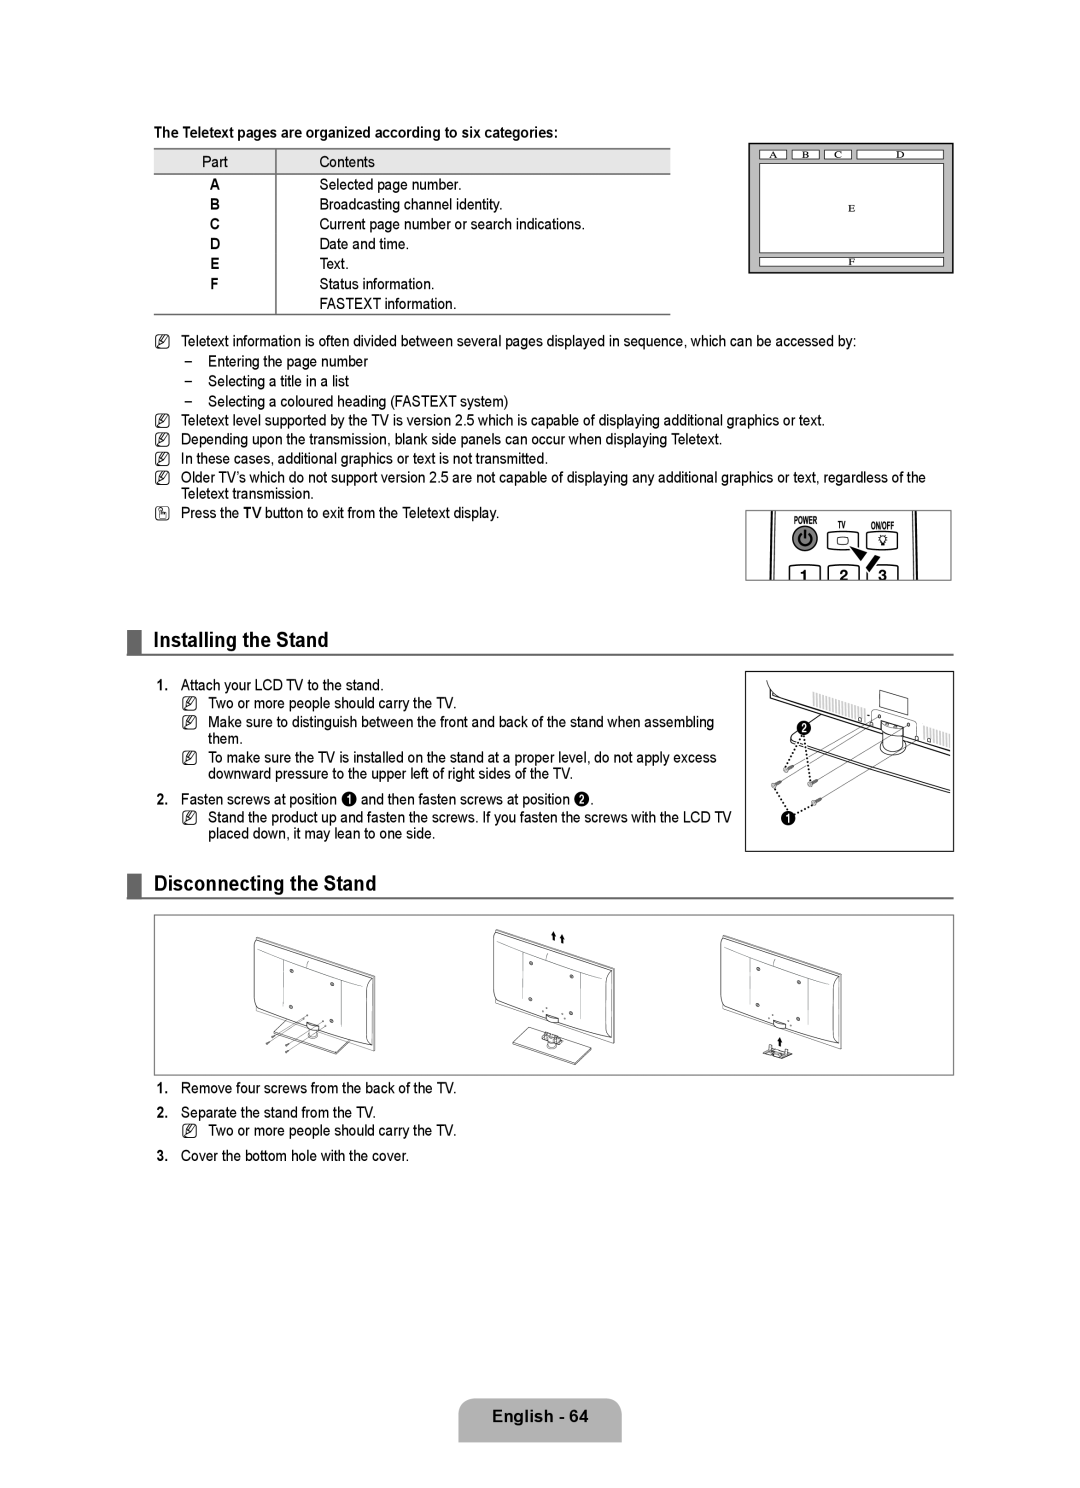 Samsung LA52B750U1R, LA46B750U1R, LA40B750U1R user manual Installing the Stand, Disconnecting the Stand, English 